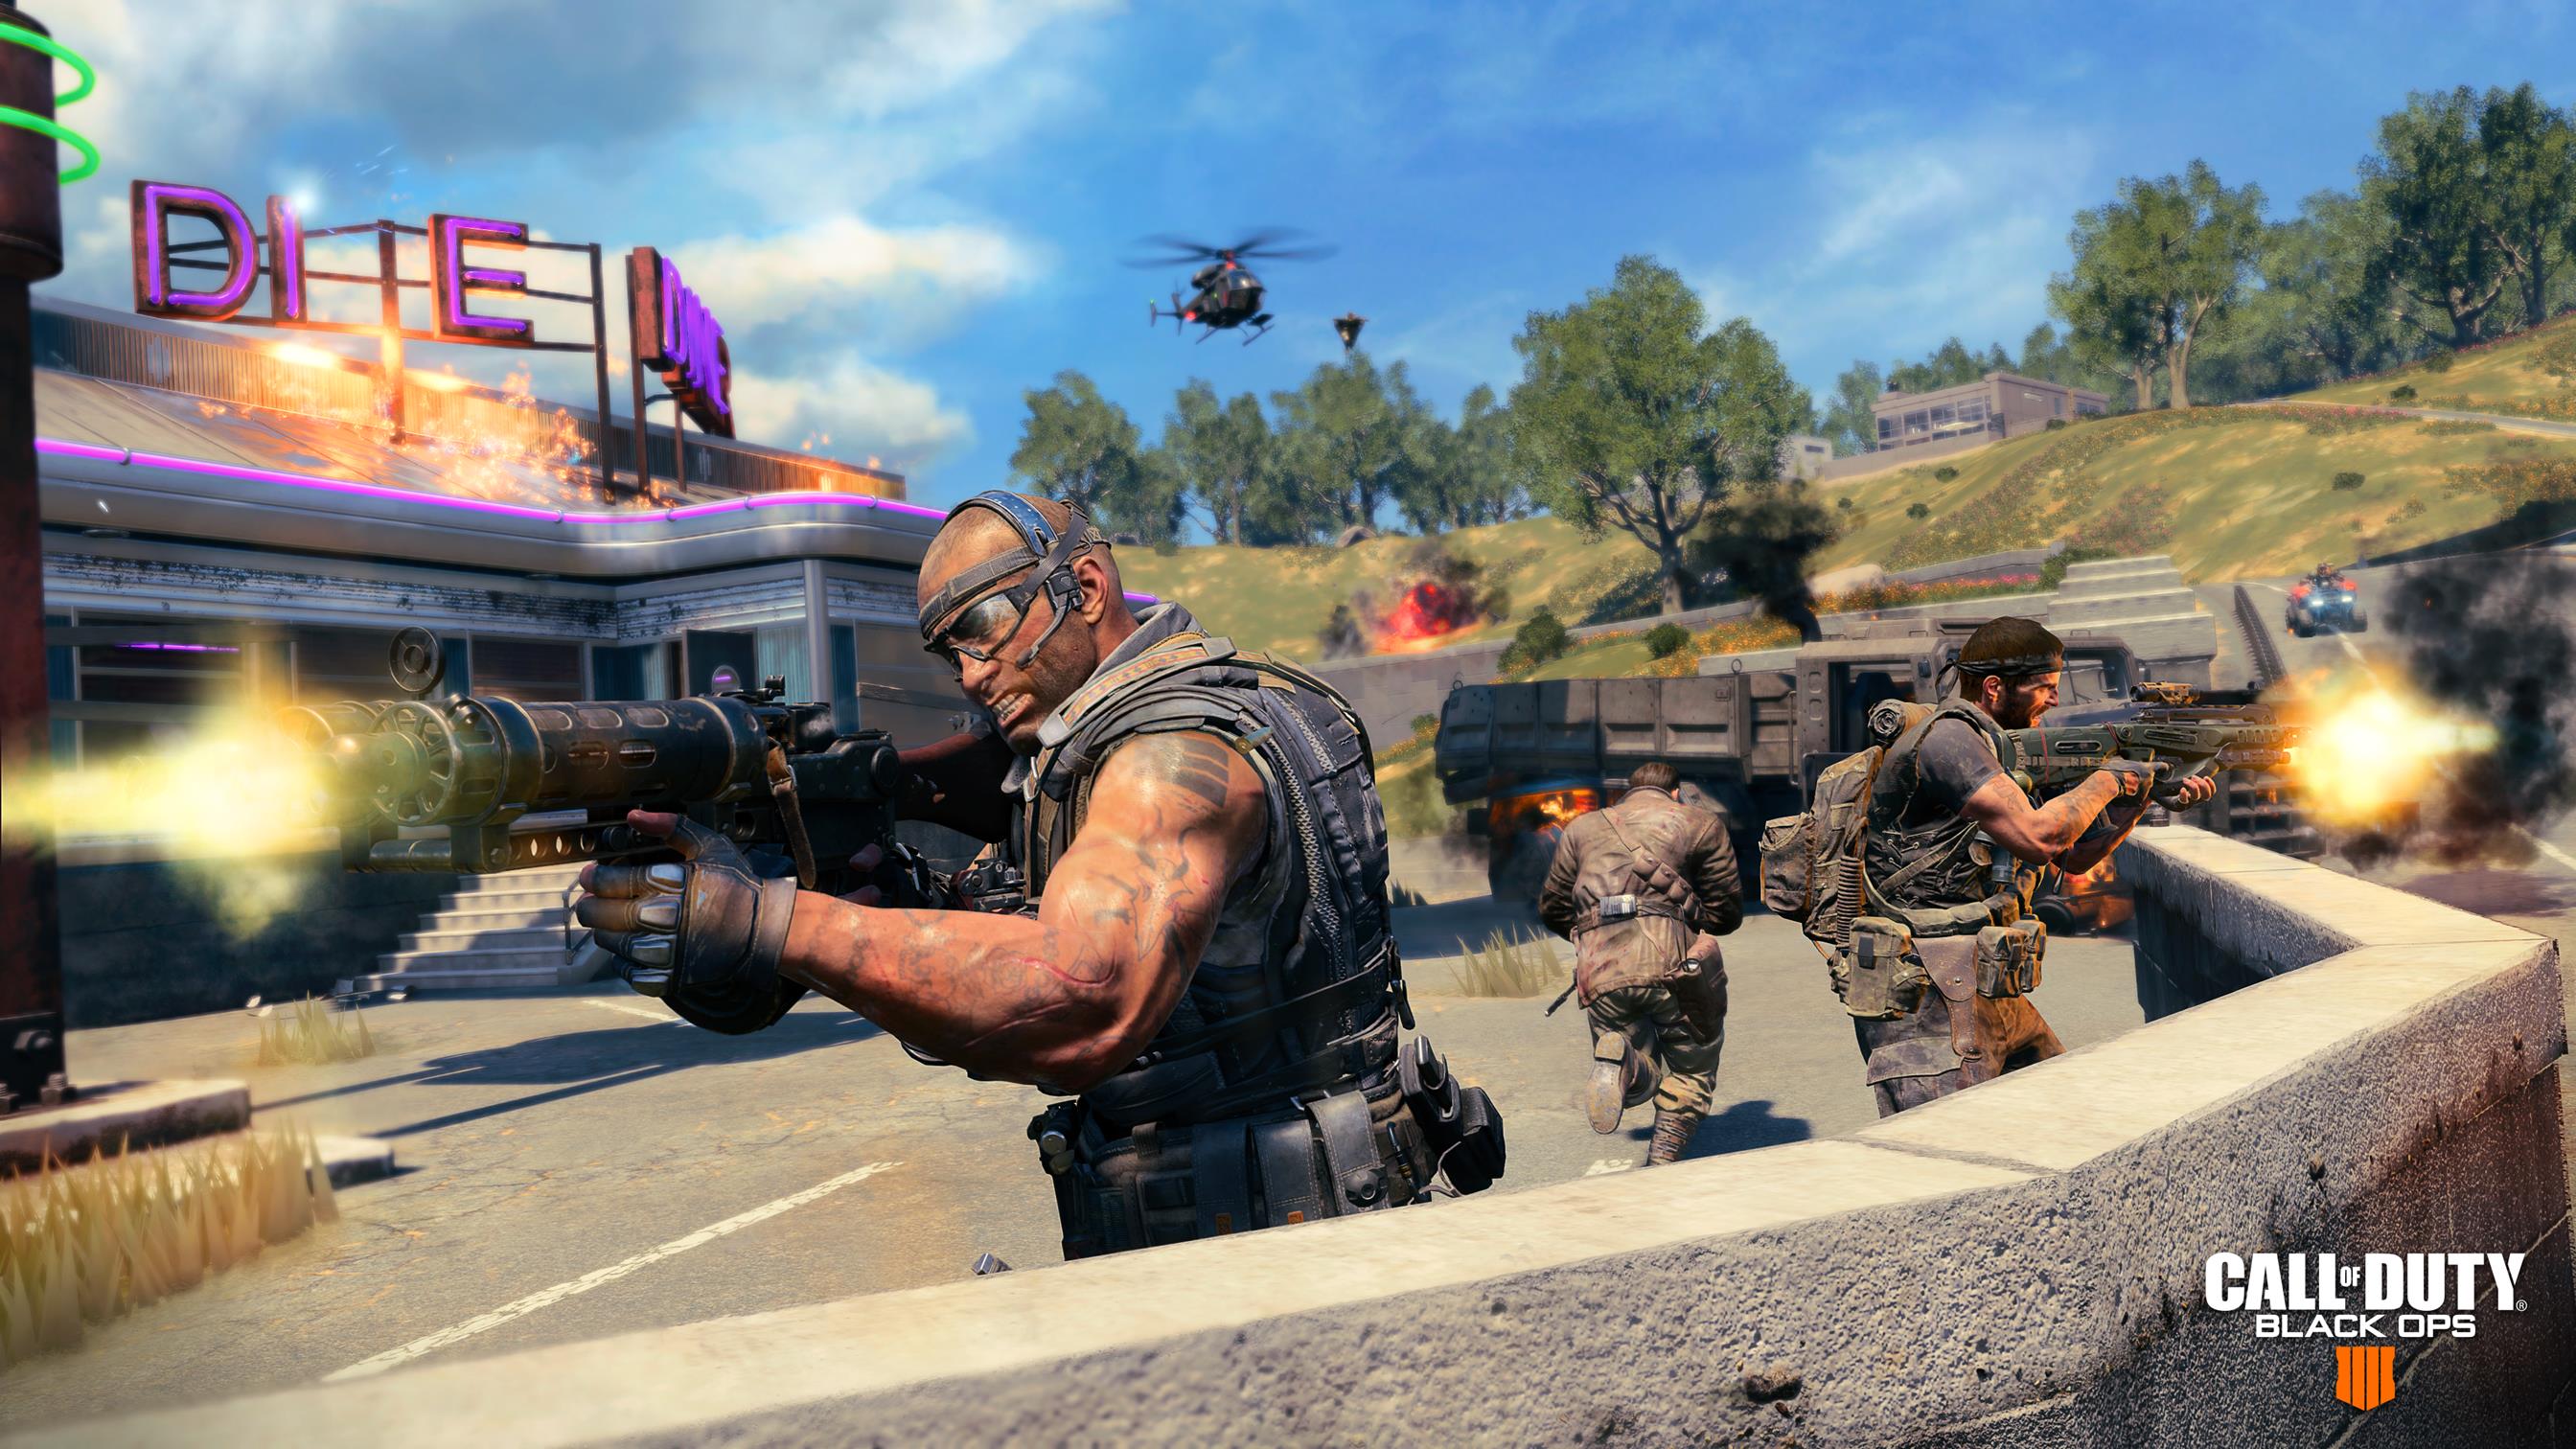 Image for Black Ops 4 Blackout gets new weapon camo unlock mechanic on PS4, competitive mode comes to multiplayer